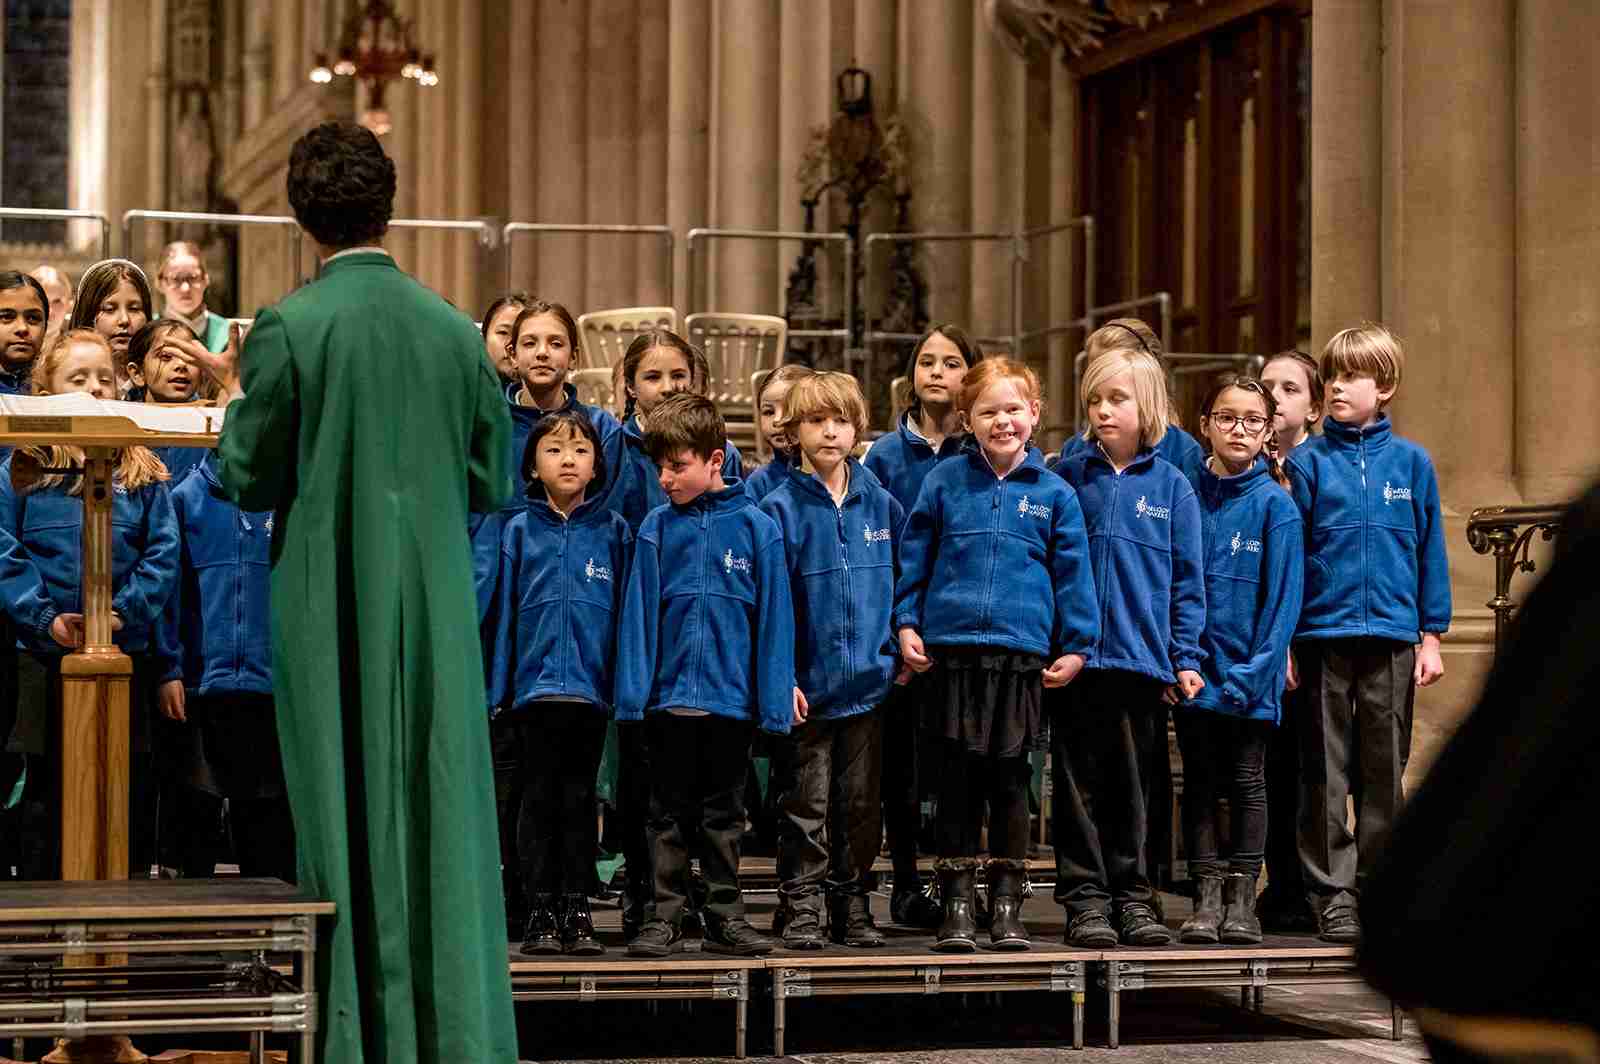 Members of young children's choir performing